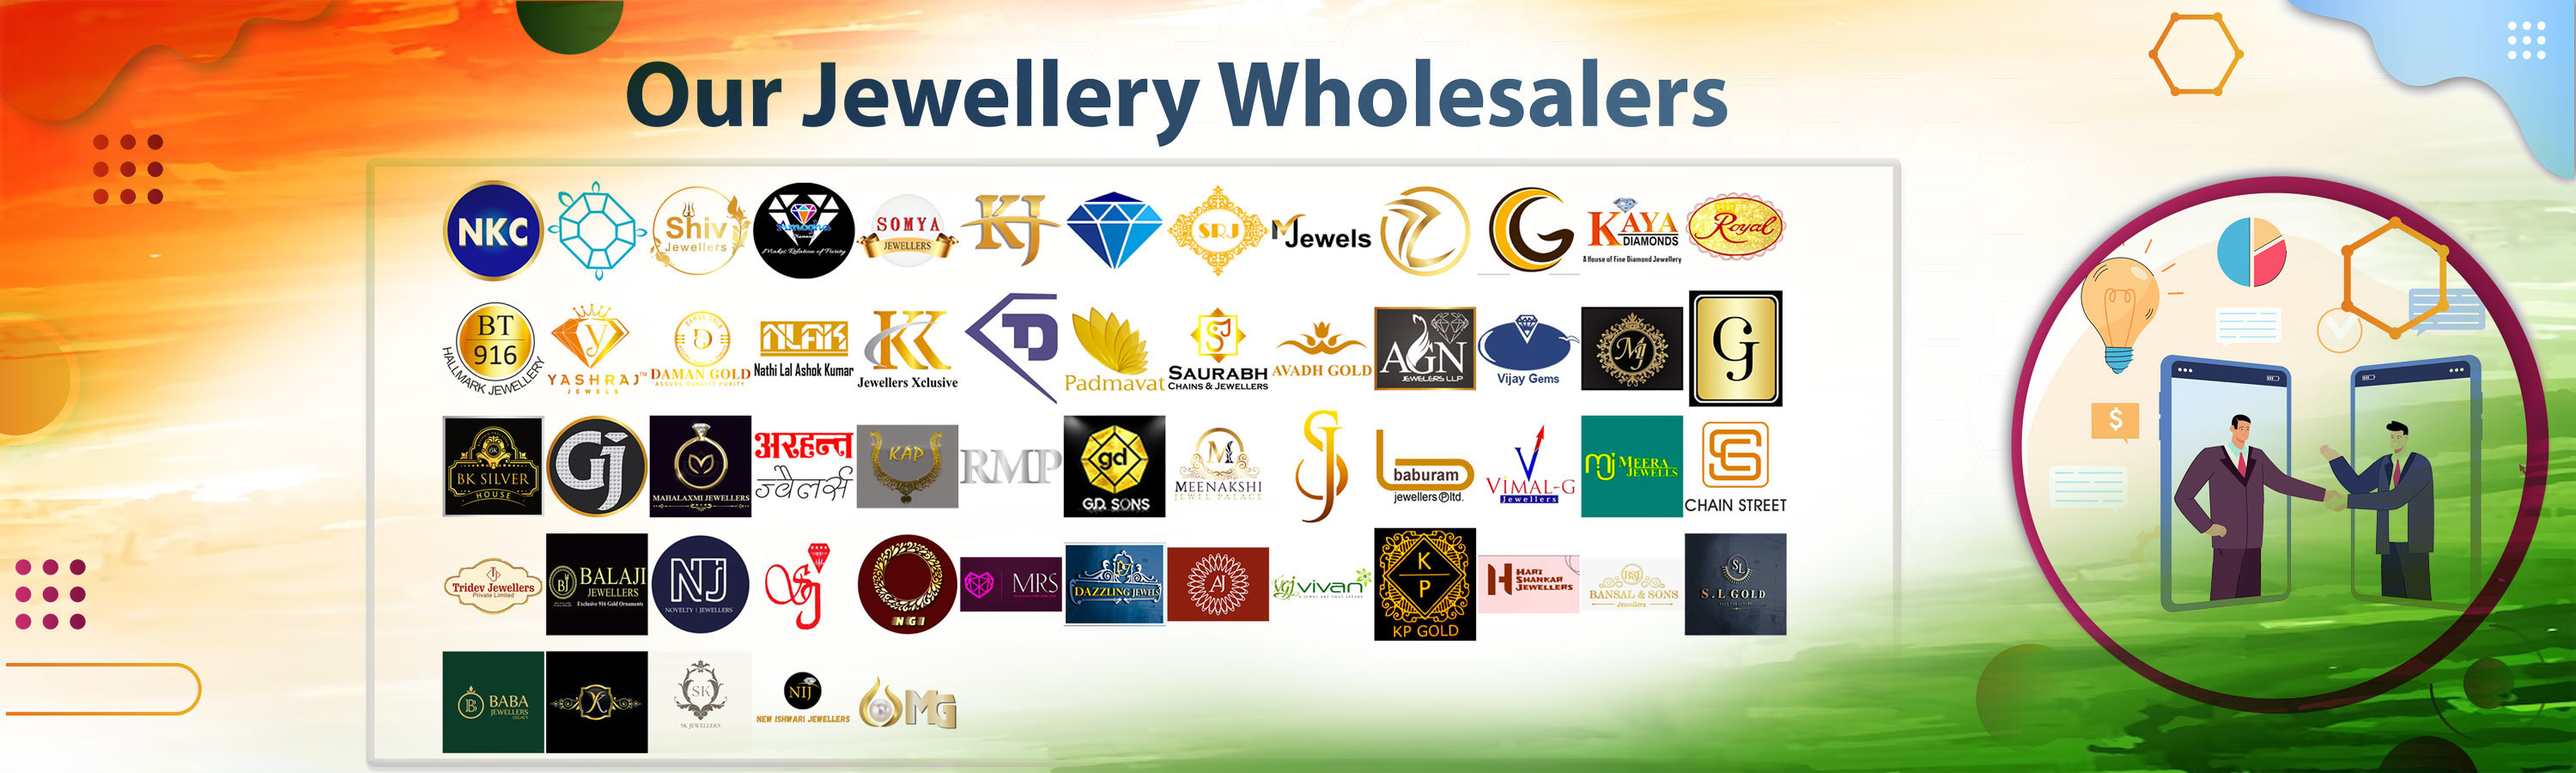 Our Jewellery Wholesaler